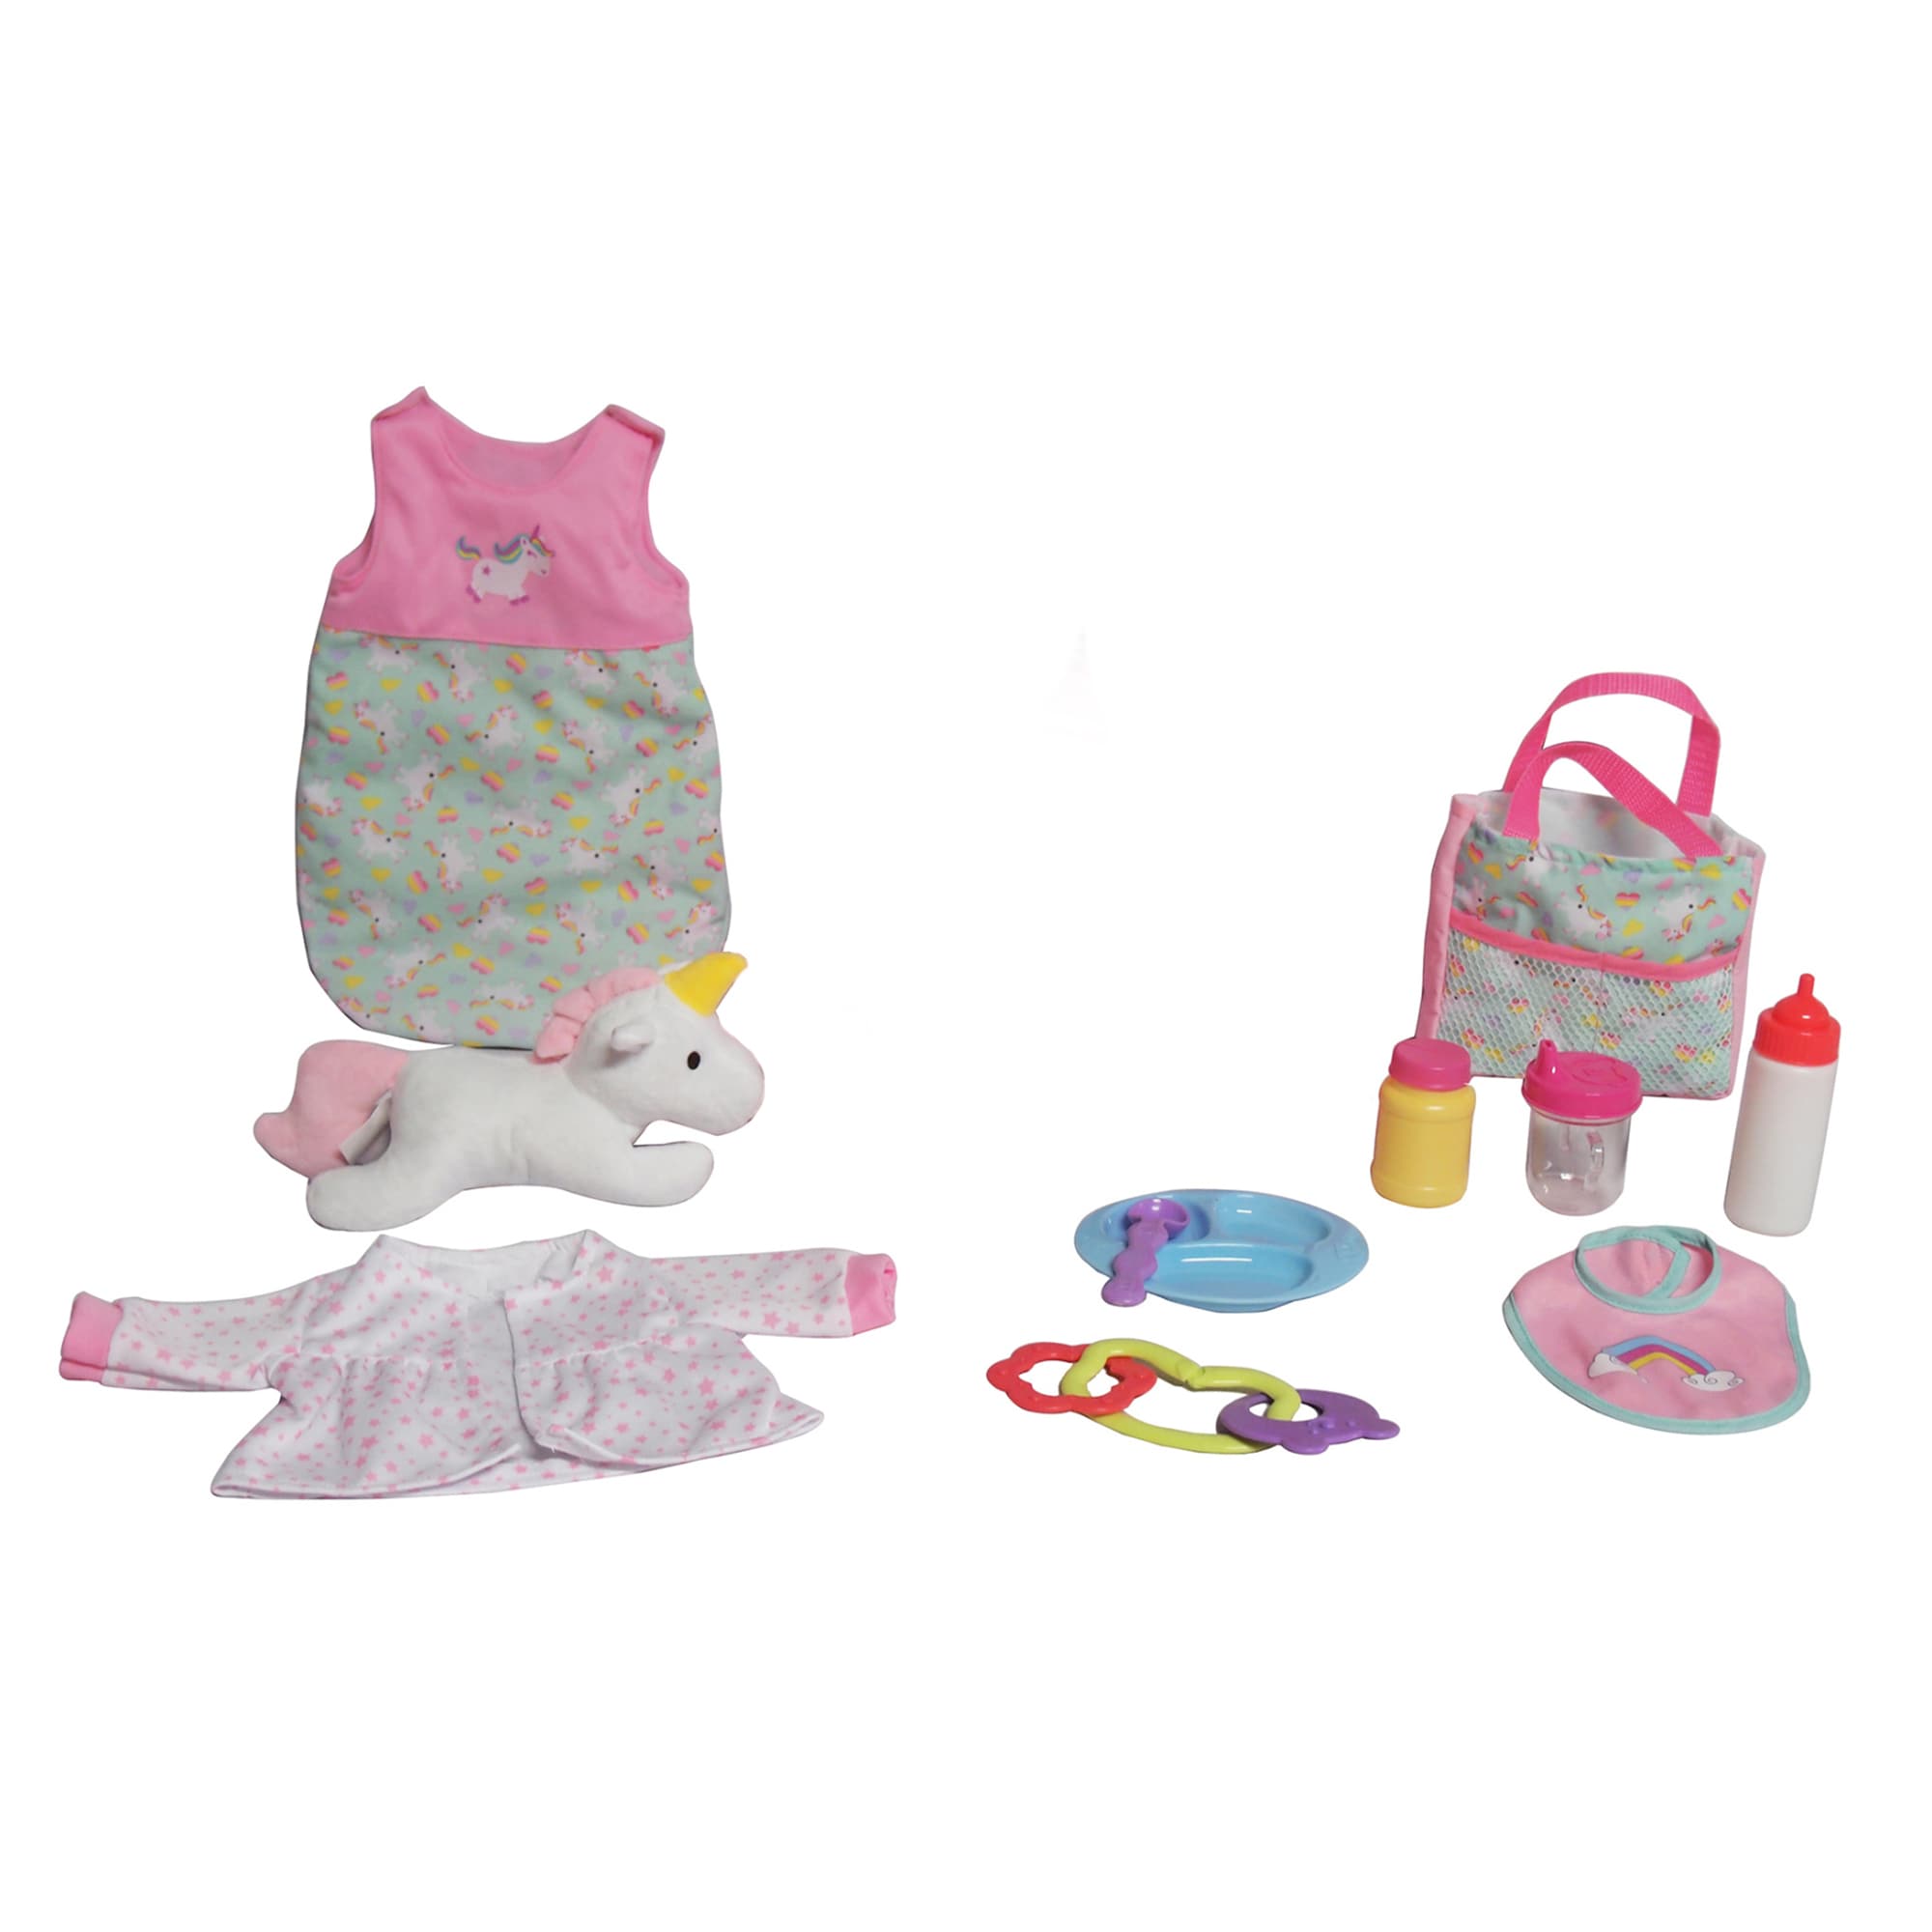 Gigo Toys 16-in Soft Baby Doll with Carrier, Sleeping Bag, Diaper Bag ...